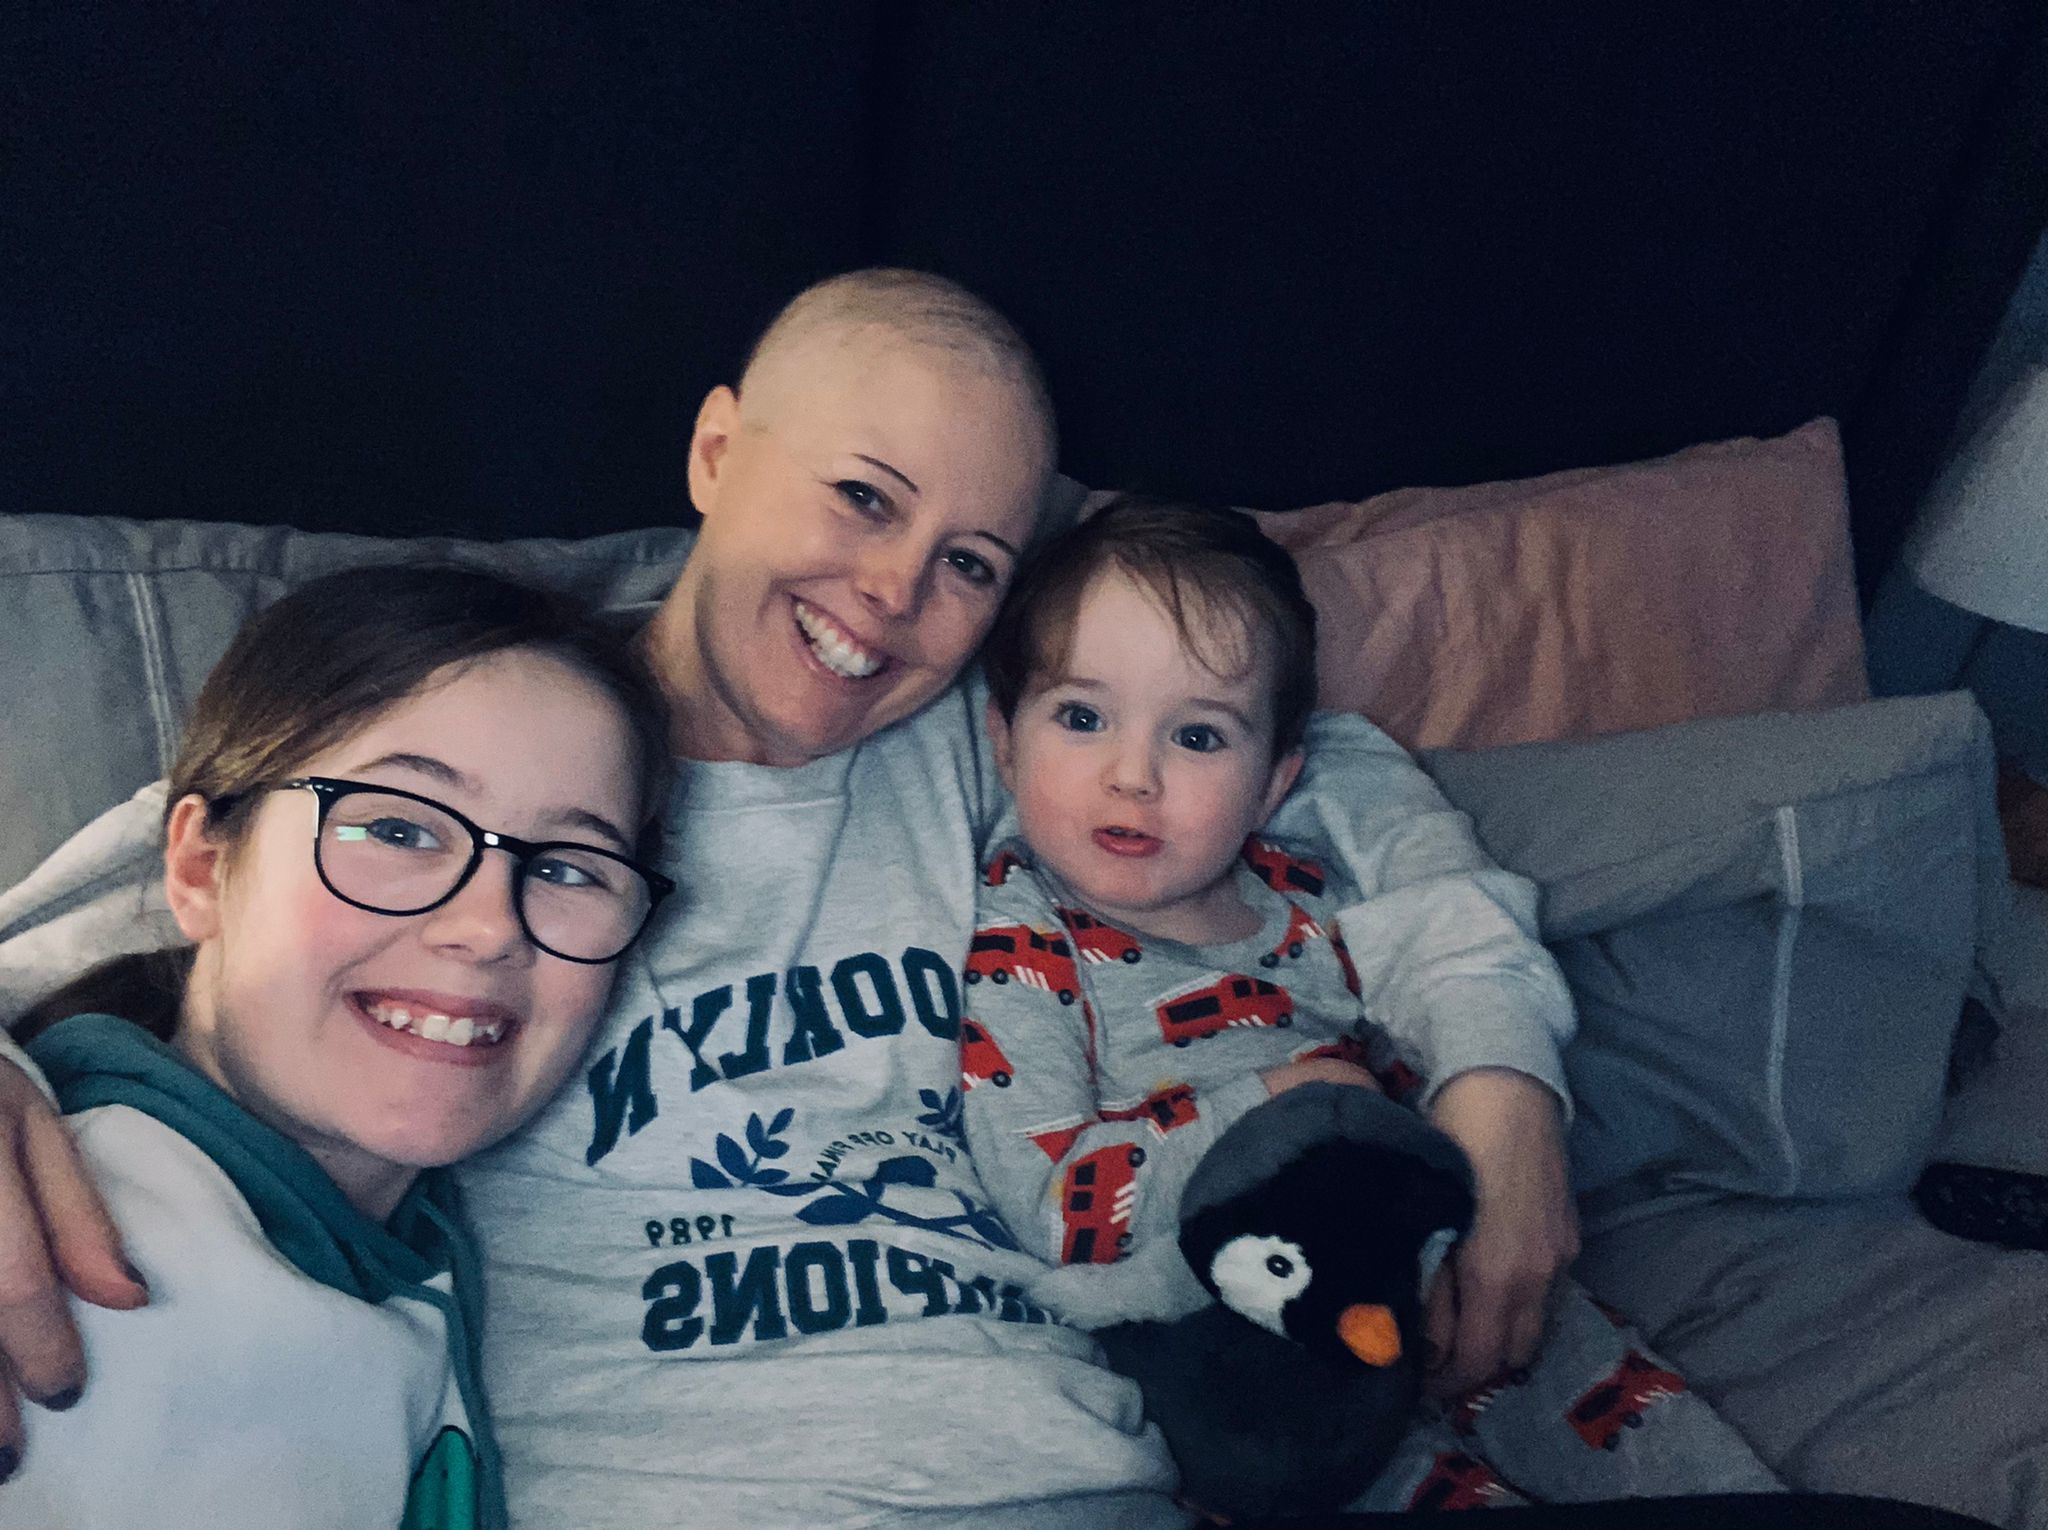 INSPIRATIONAL: Samanthas story will be aired ahead of Shine Night Walk events across the UK. Pictures provided by Cancer Research UK.